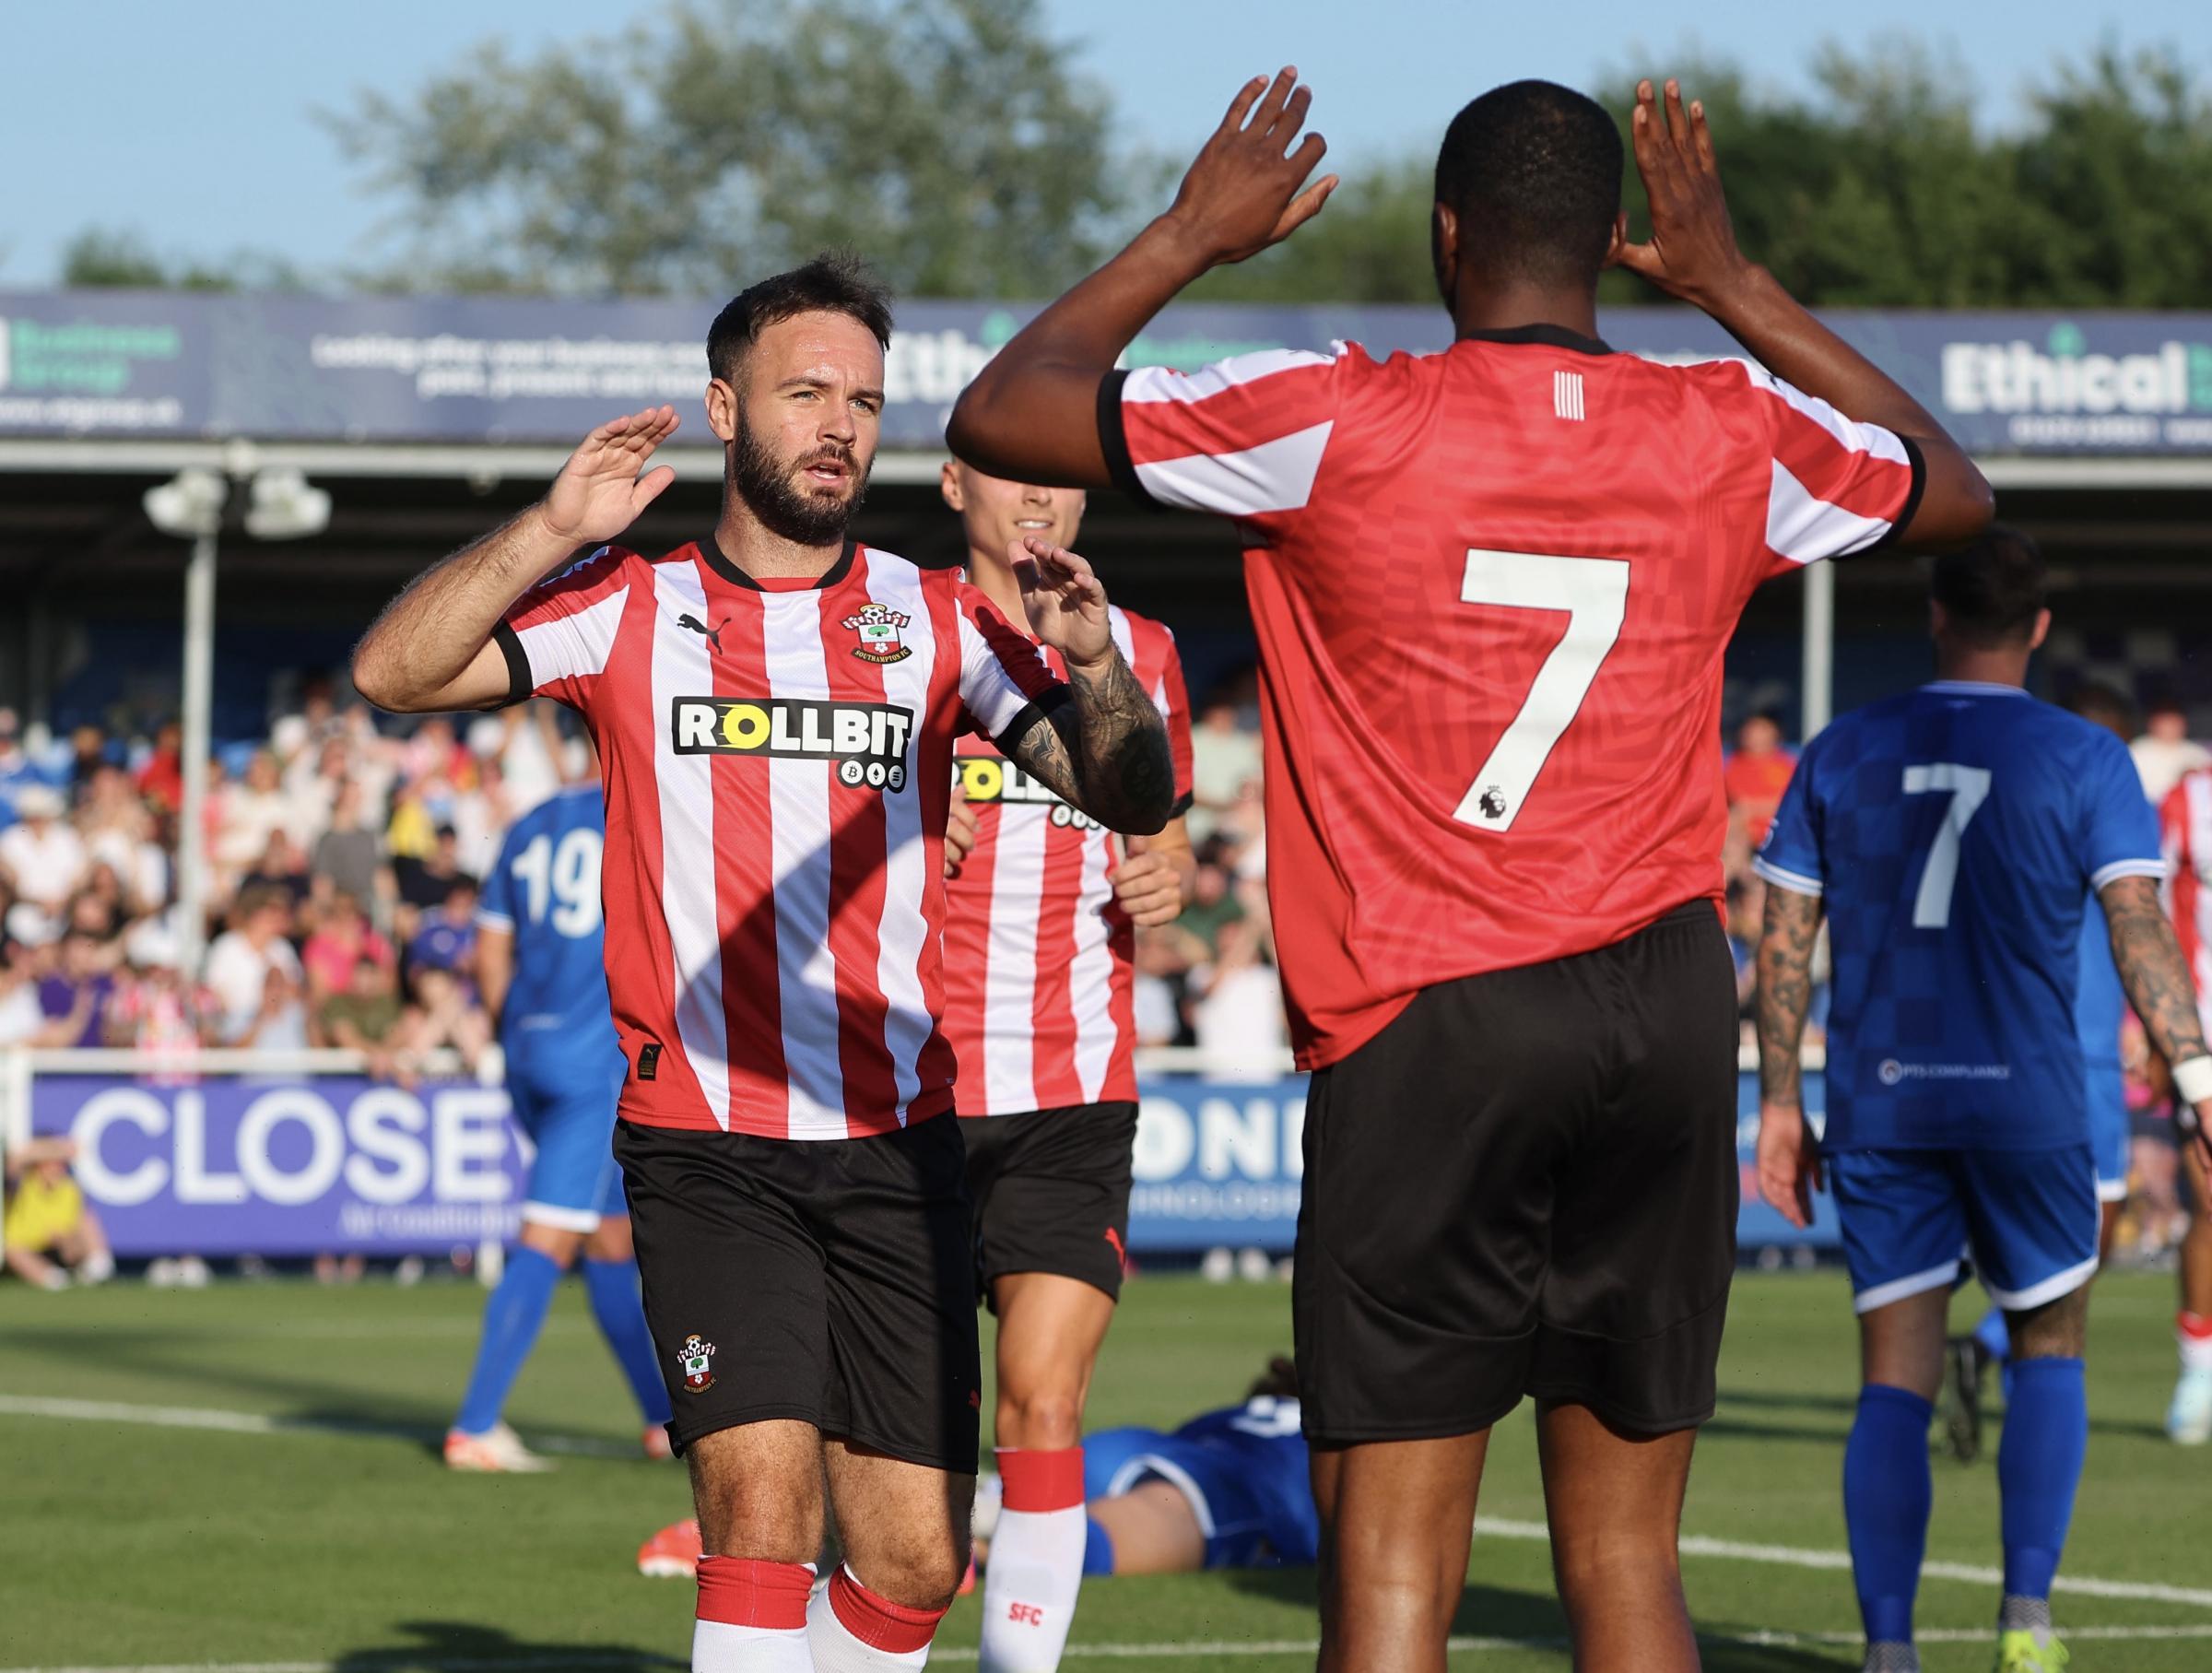 Southampton friendly at Eastleigh sees goals and debuts galore